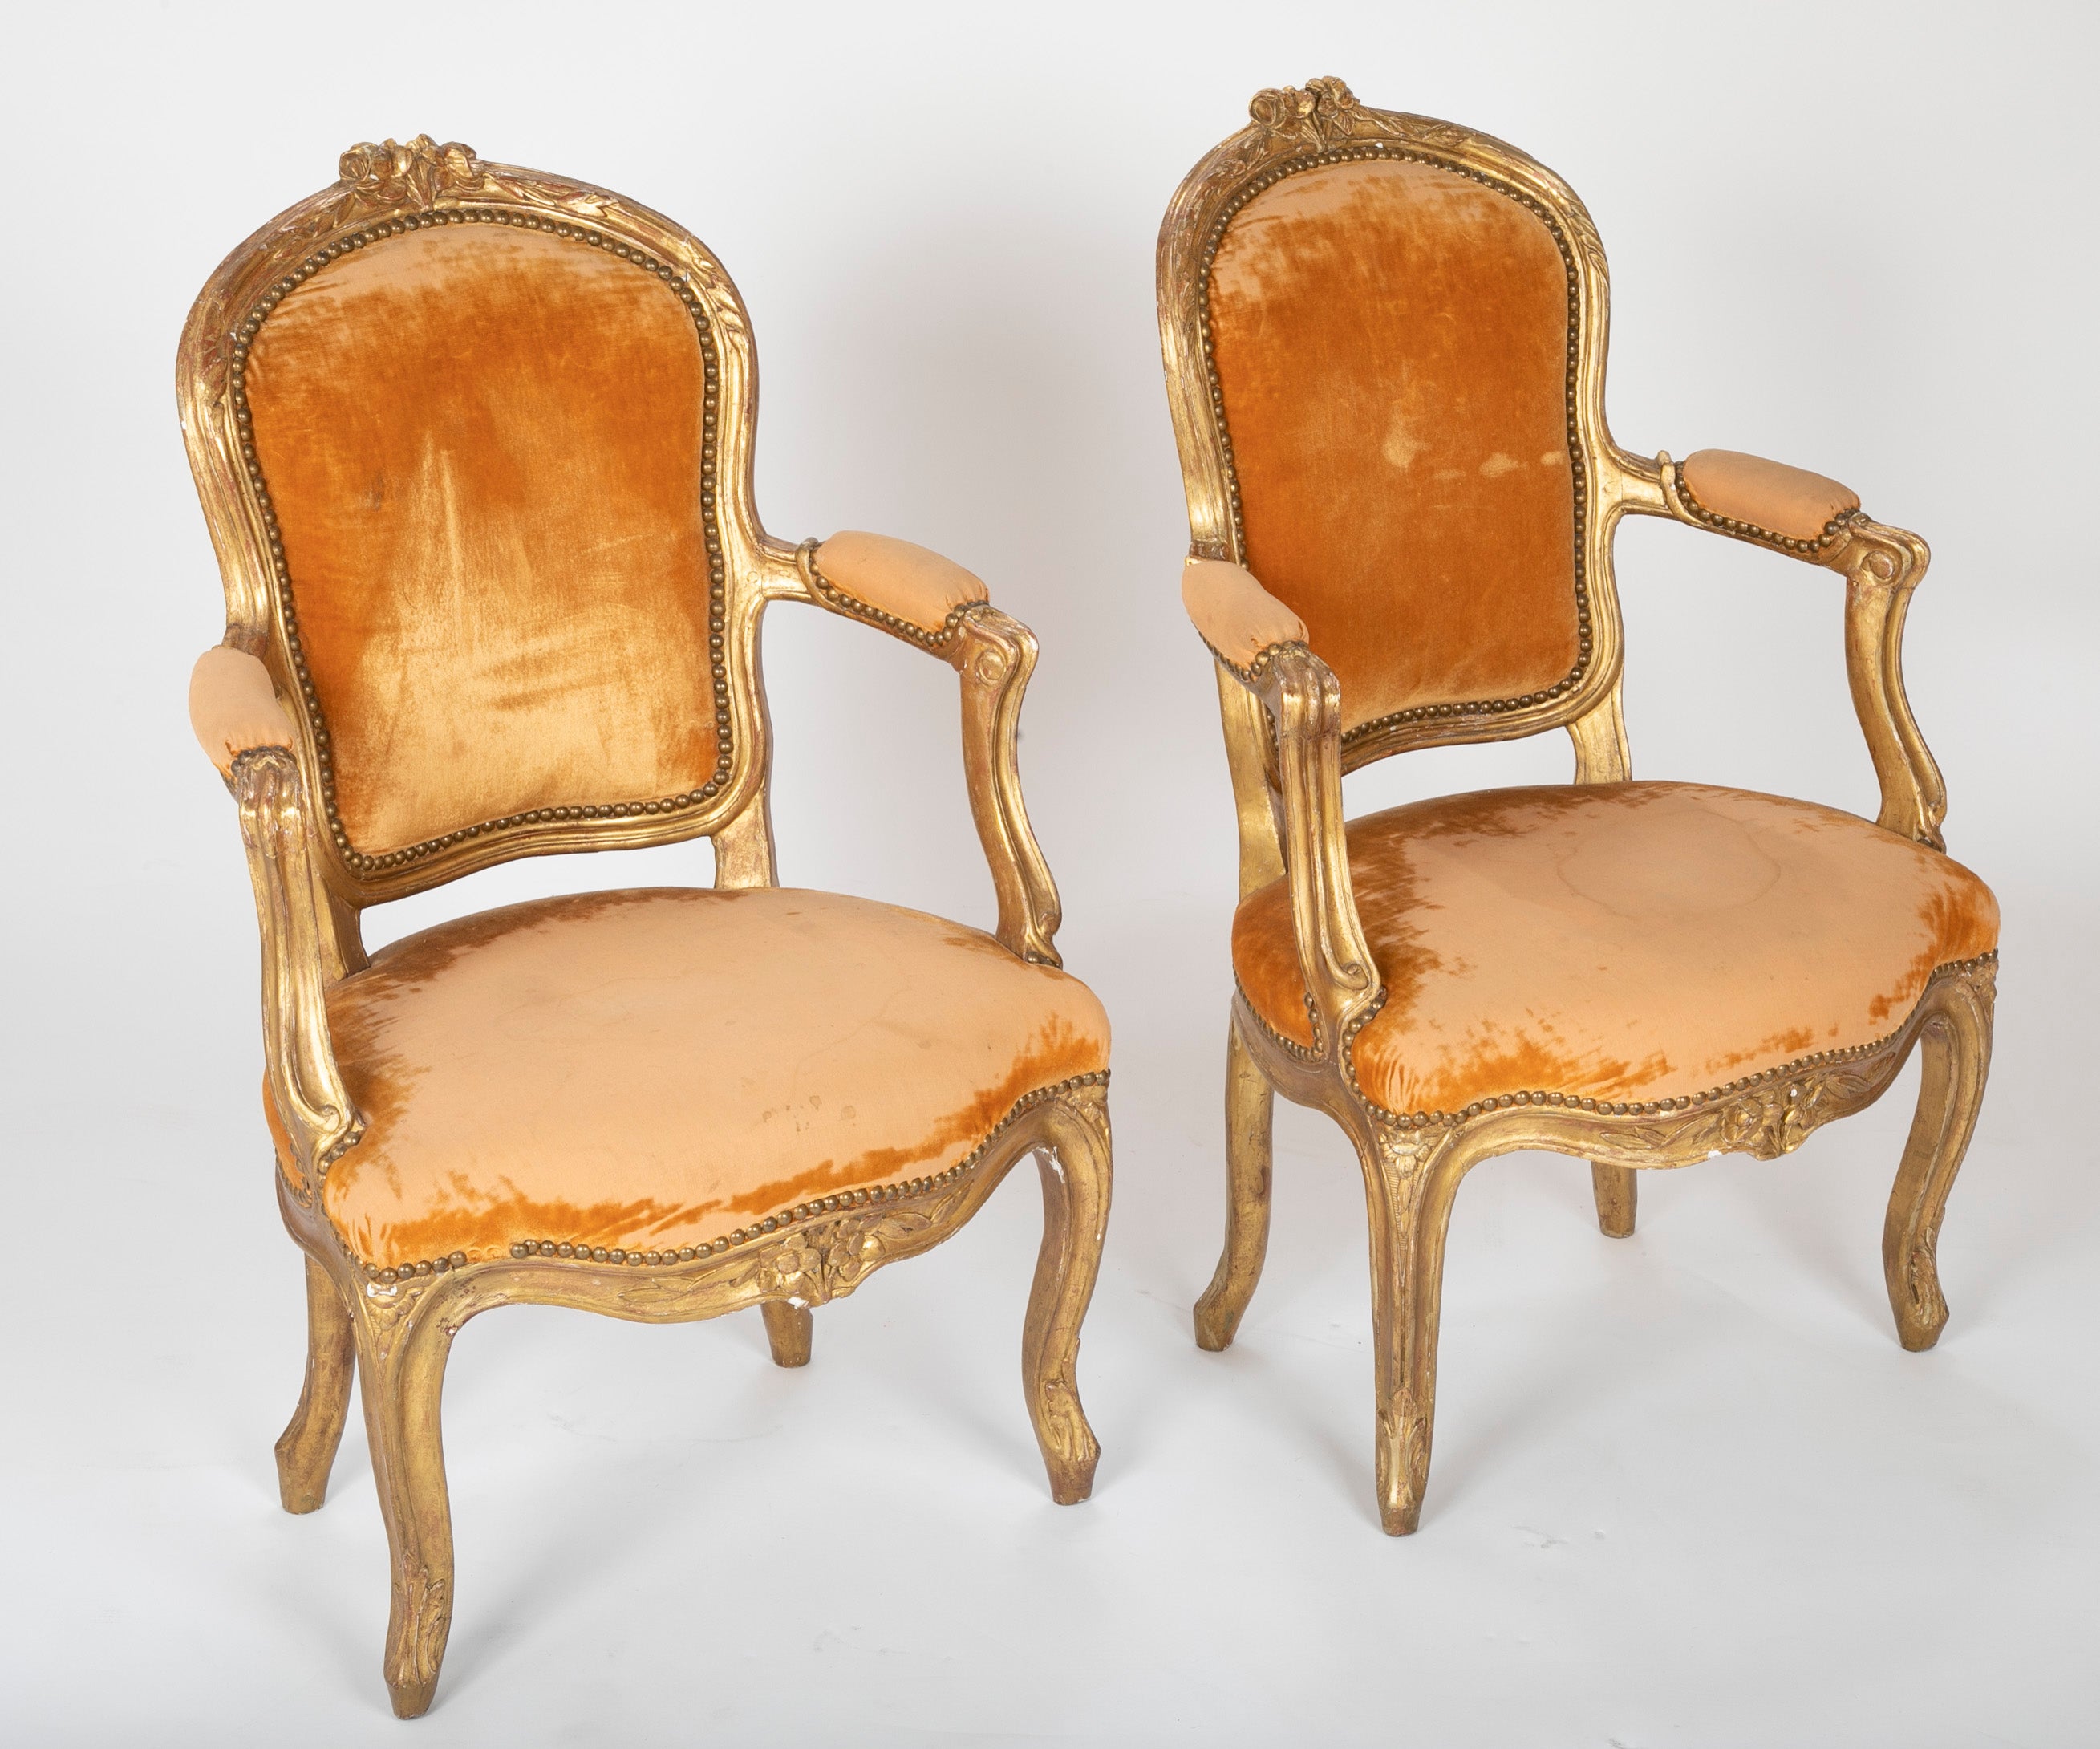 Louis XV fauteuils soar to $225,000 at Nye & Co. auction